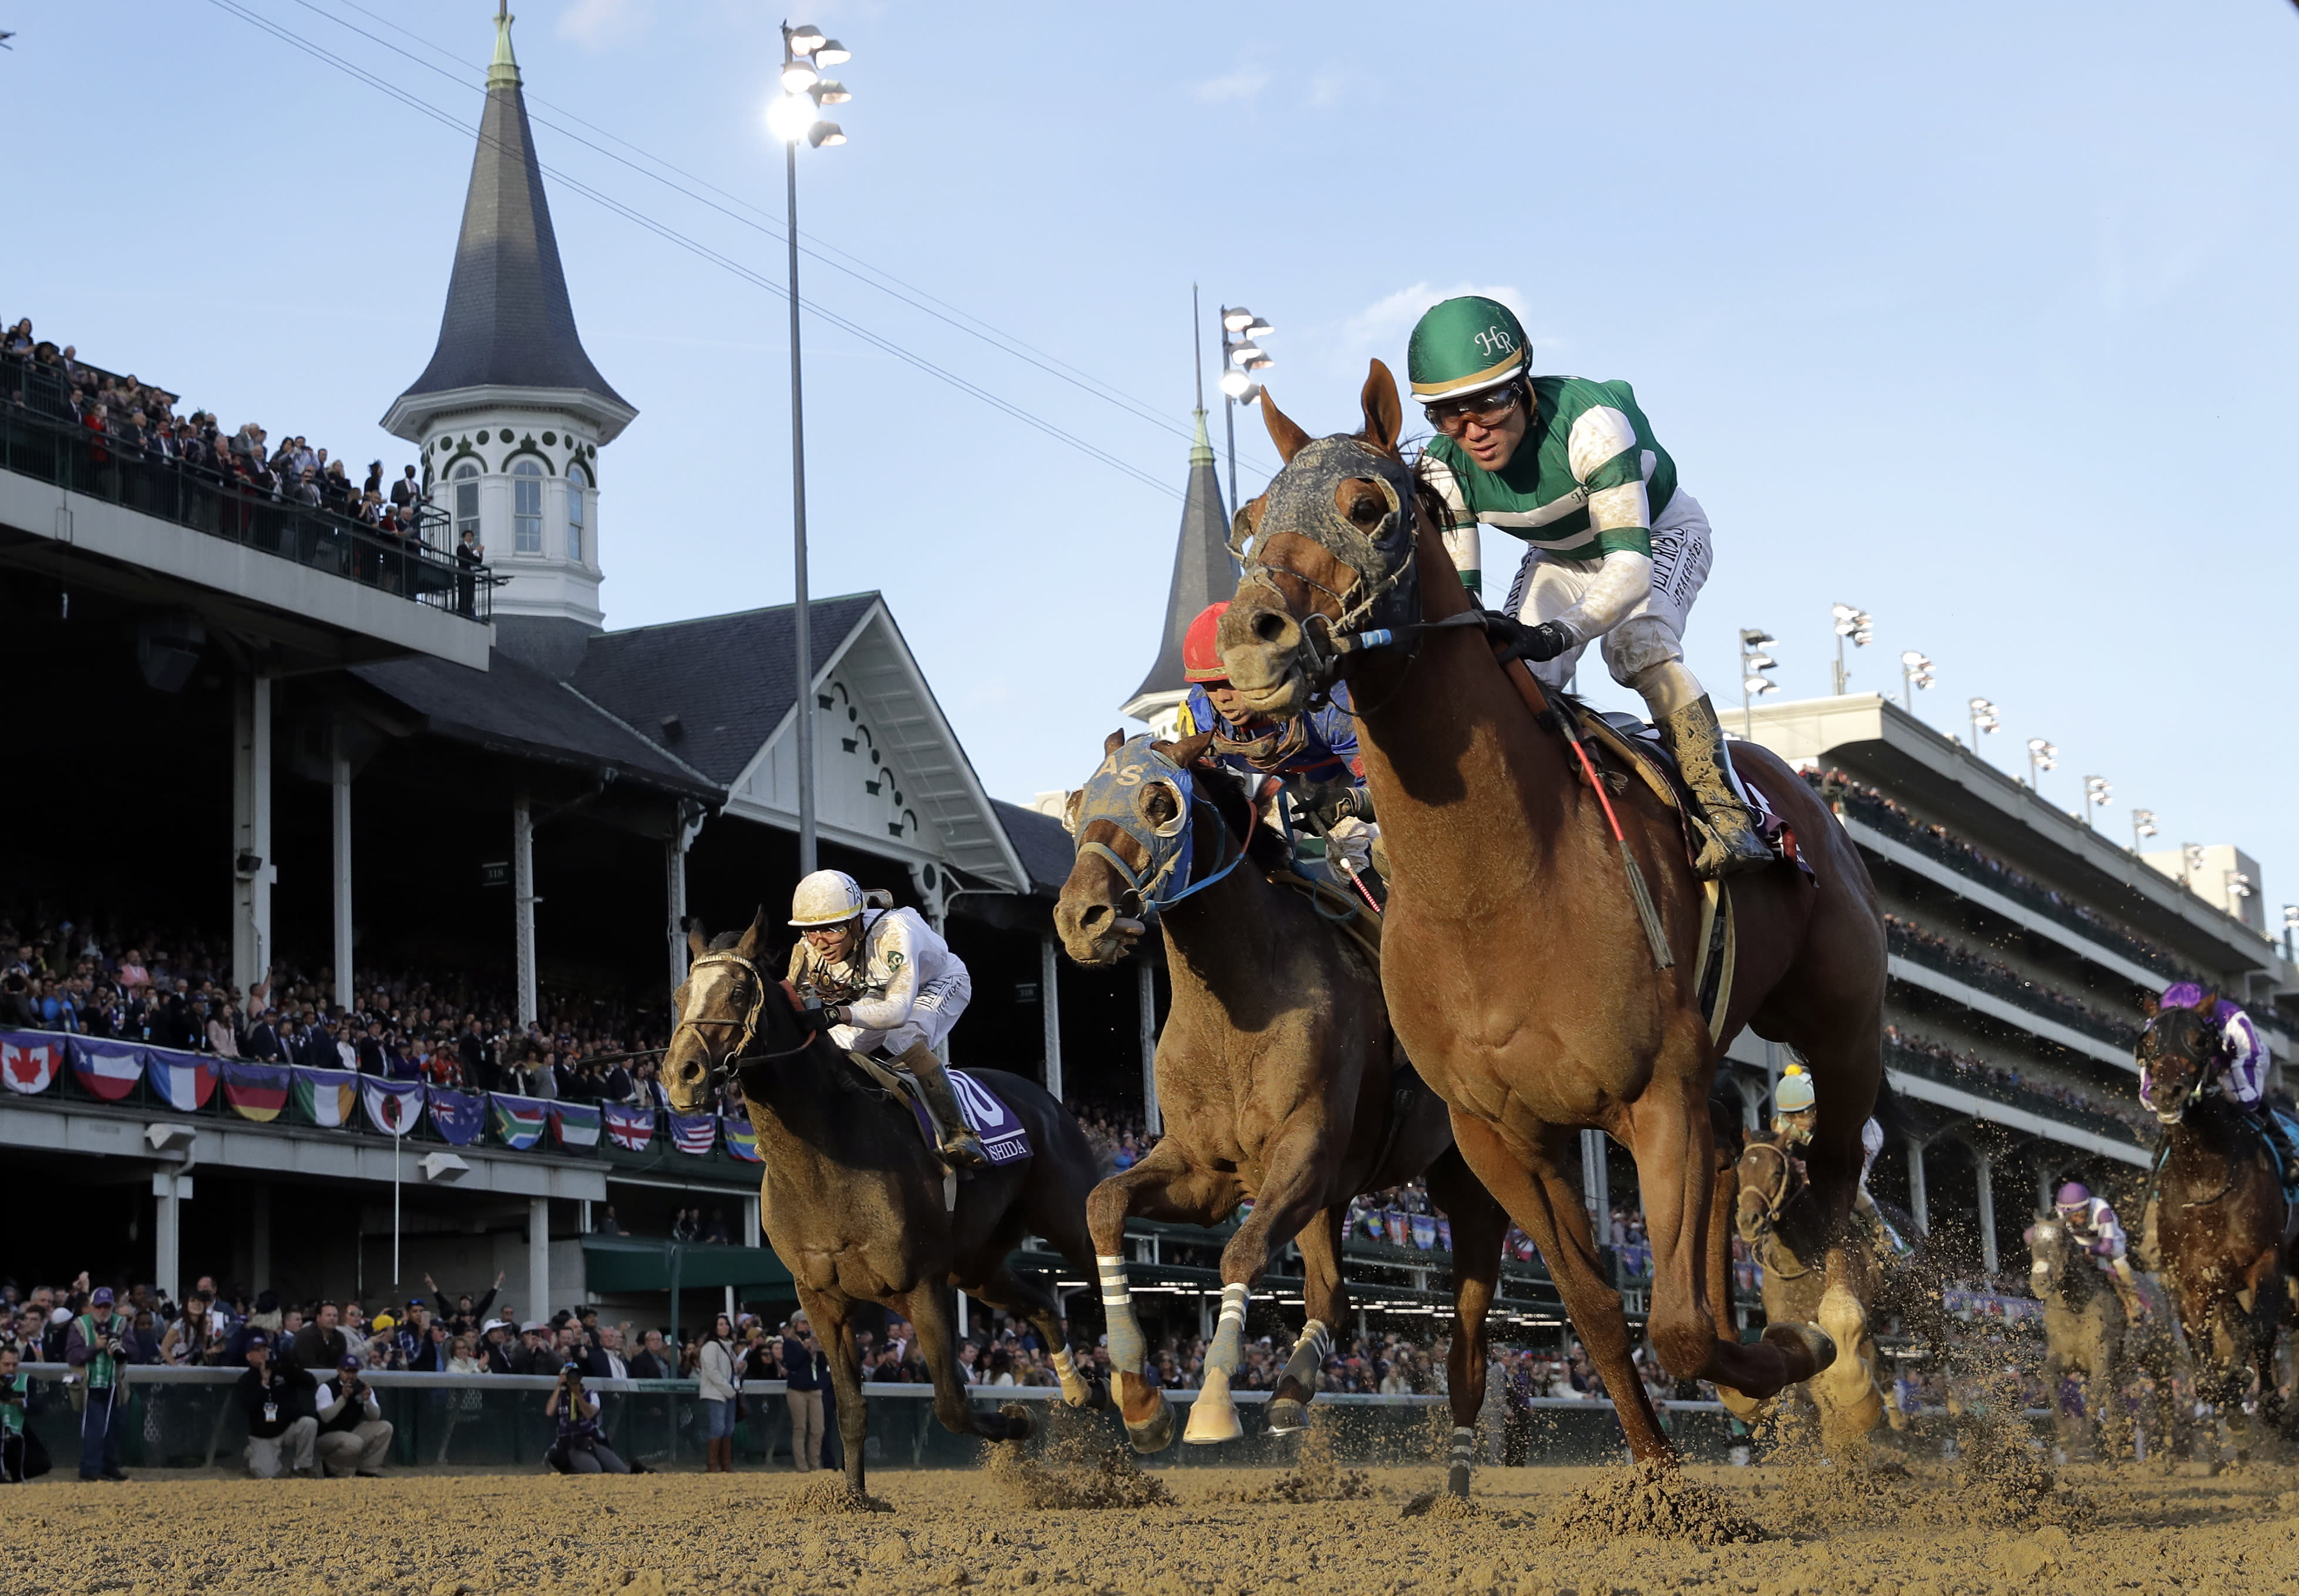 Accelerate wins Breeders' Cup Classic at Churchill Downs